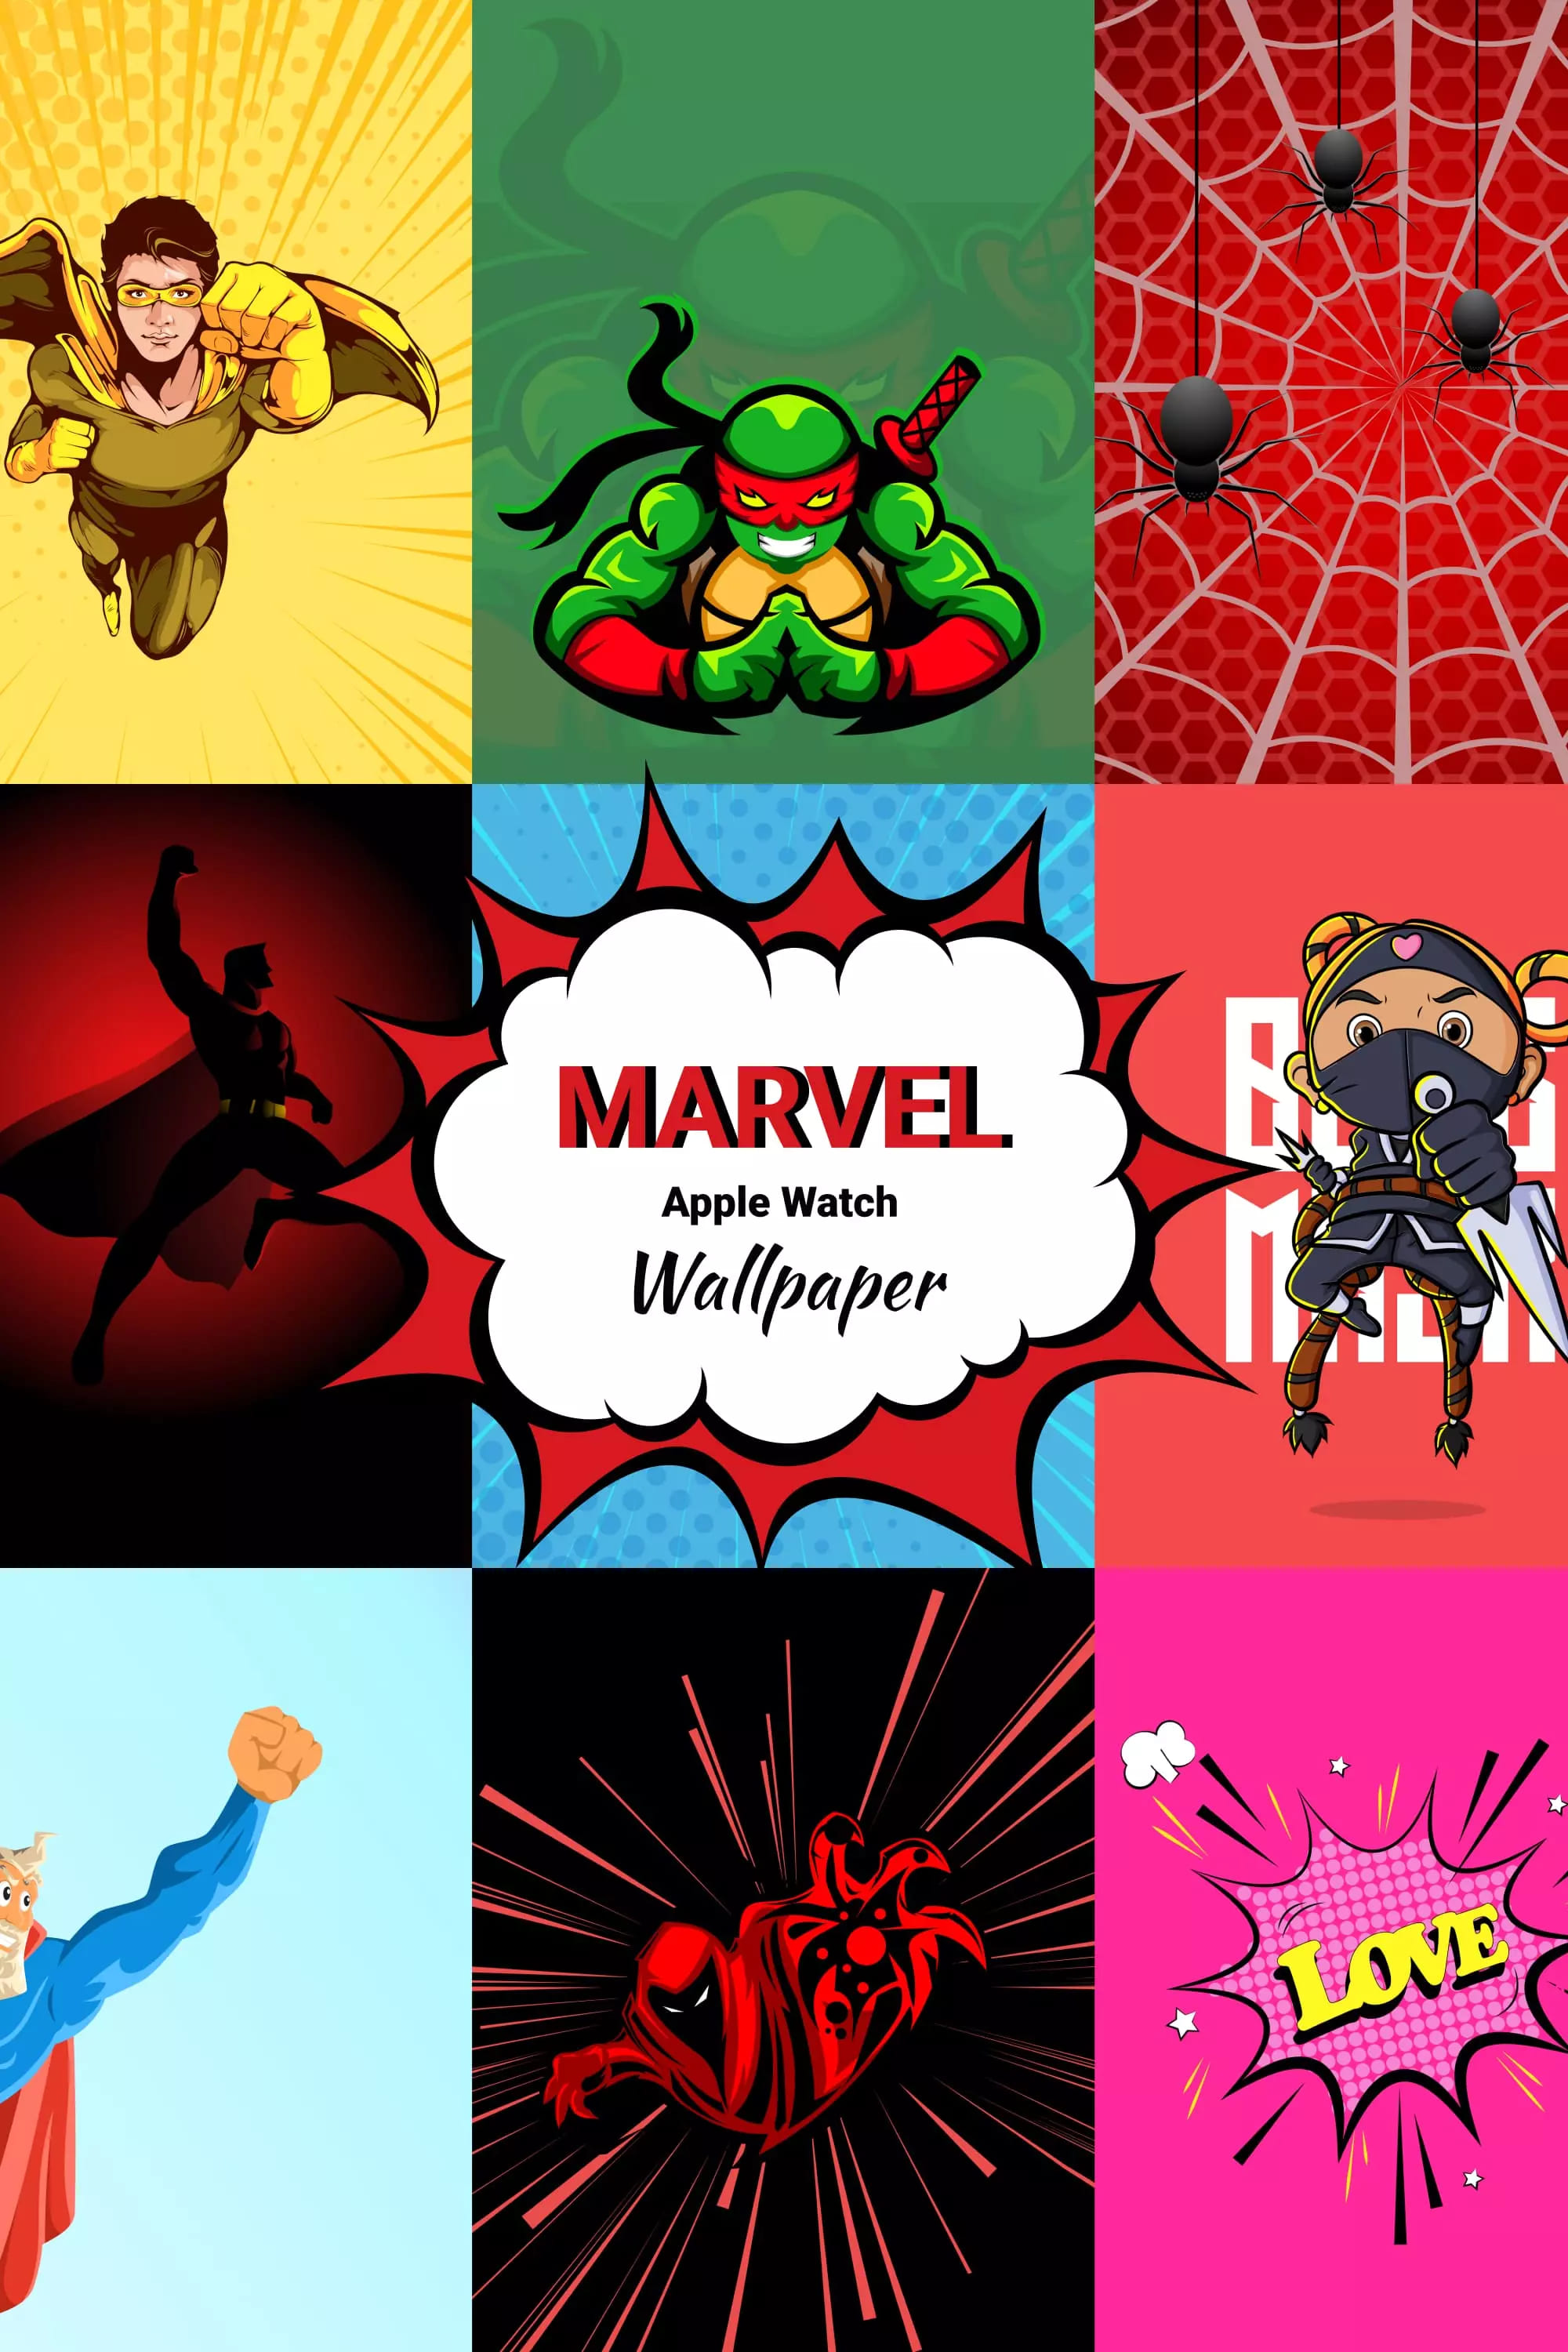 Collage with wallpapers for Apple watch with Marvel heroes.